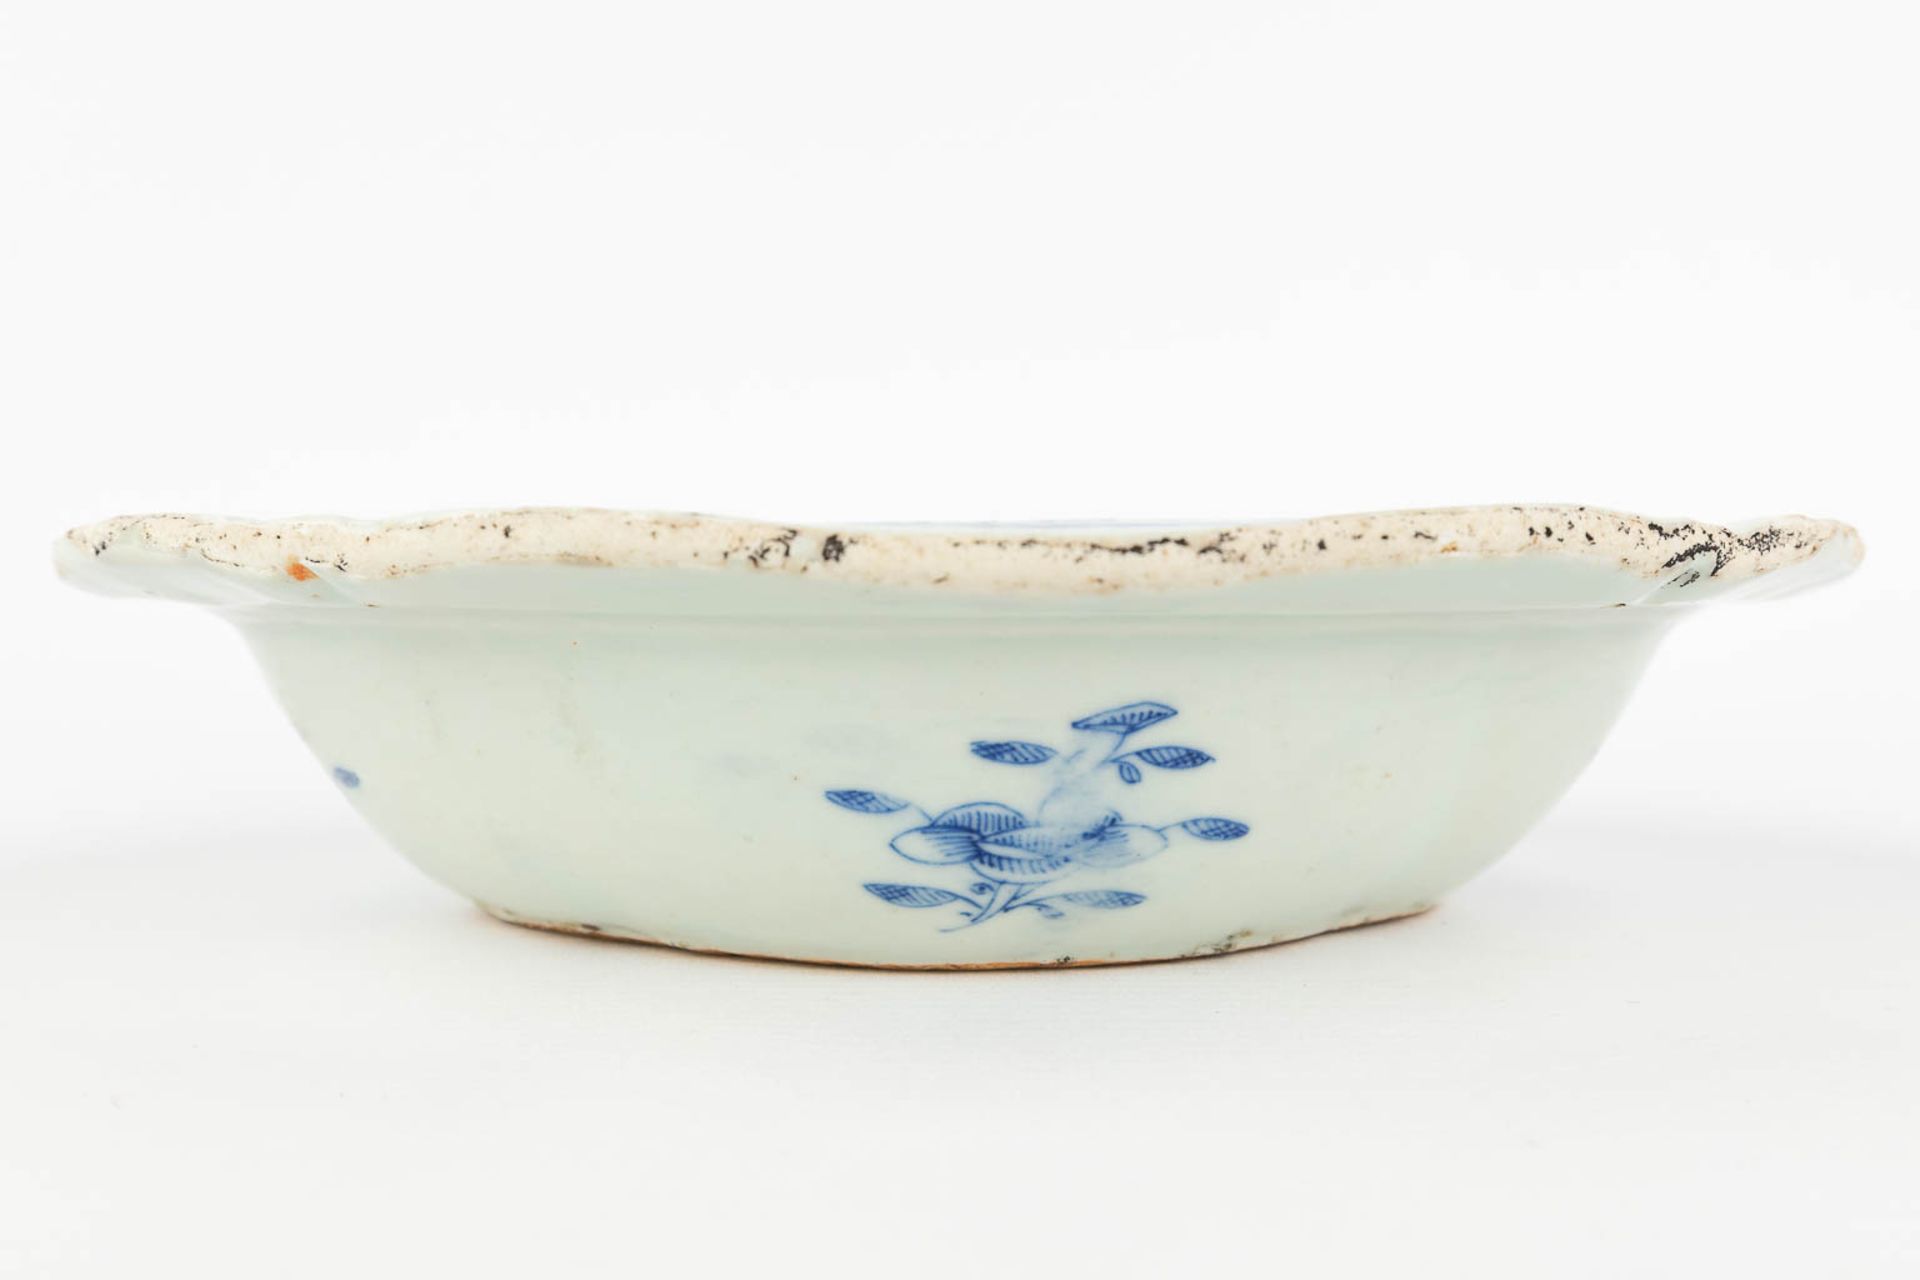 A Chinese bowl with a lid and blue-white landscape decor. 19th C. (L: 21,5 x W: 26,5 x H: 10 cm) - Image 13 of 15